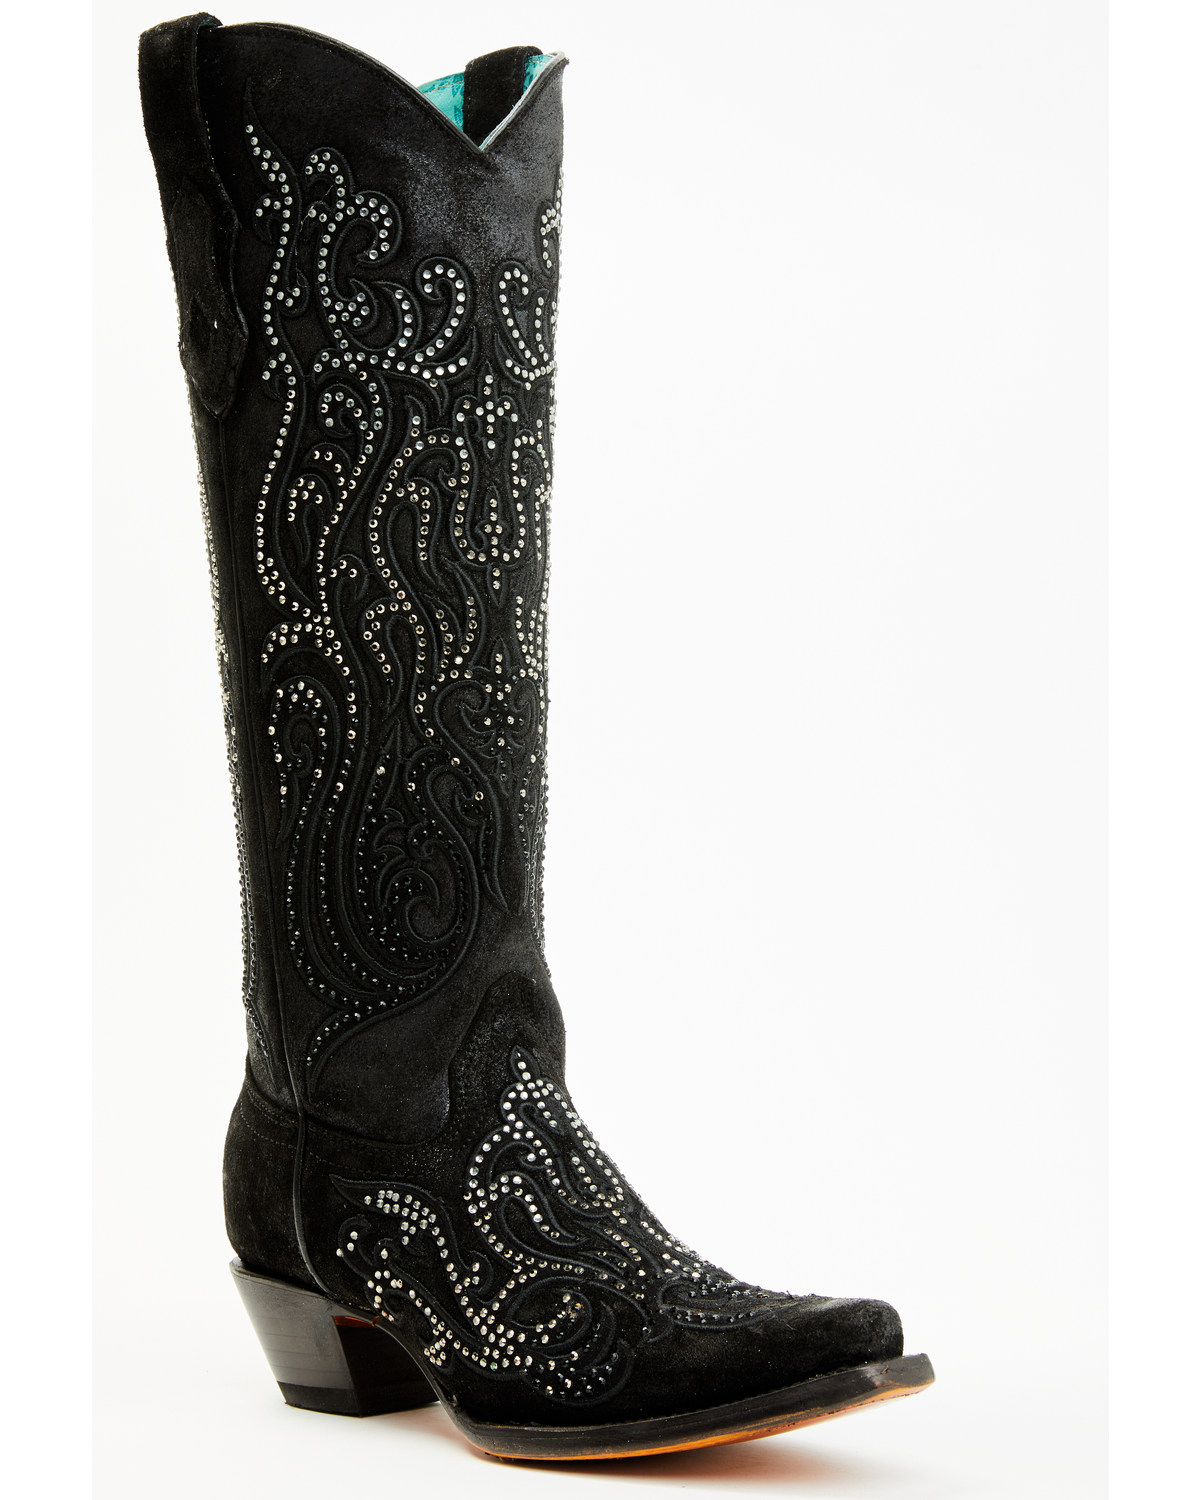 Corral Women's Crystal Embroidered Tall Western Boots